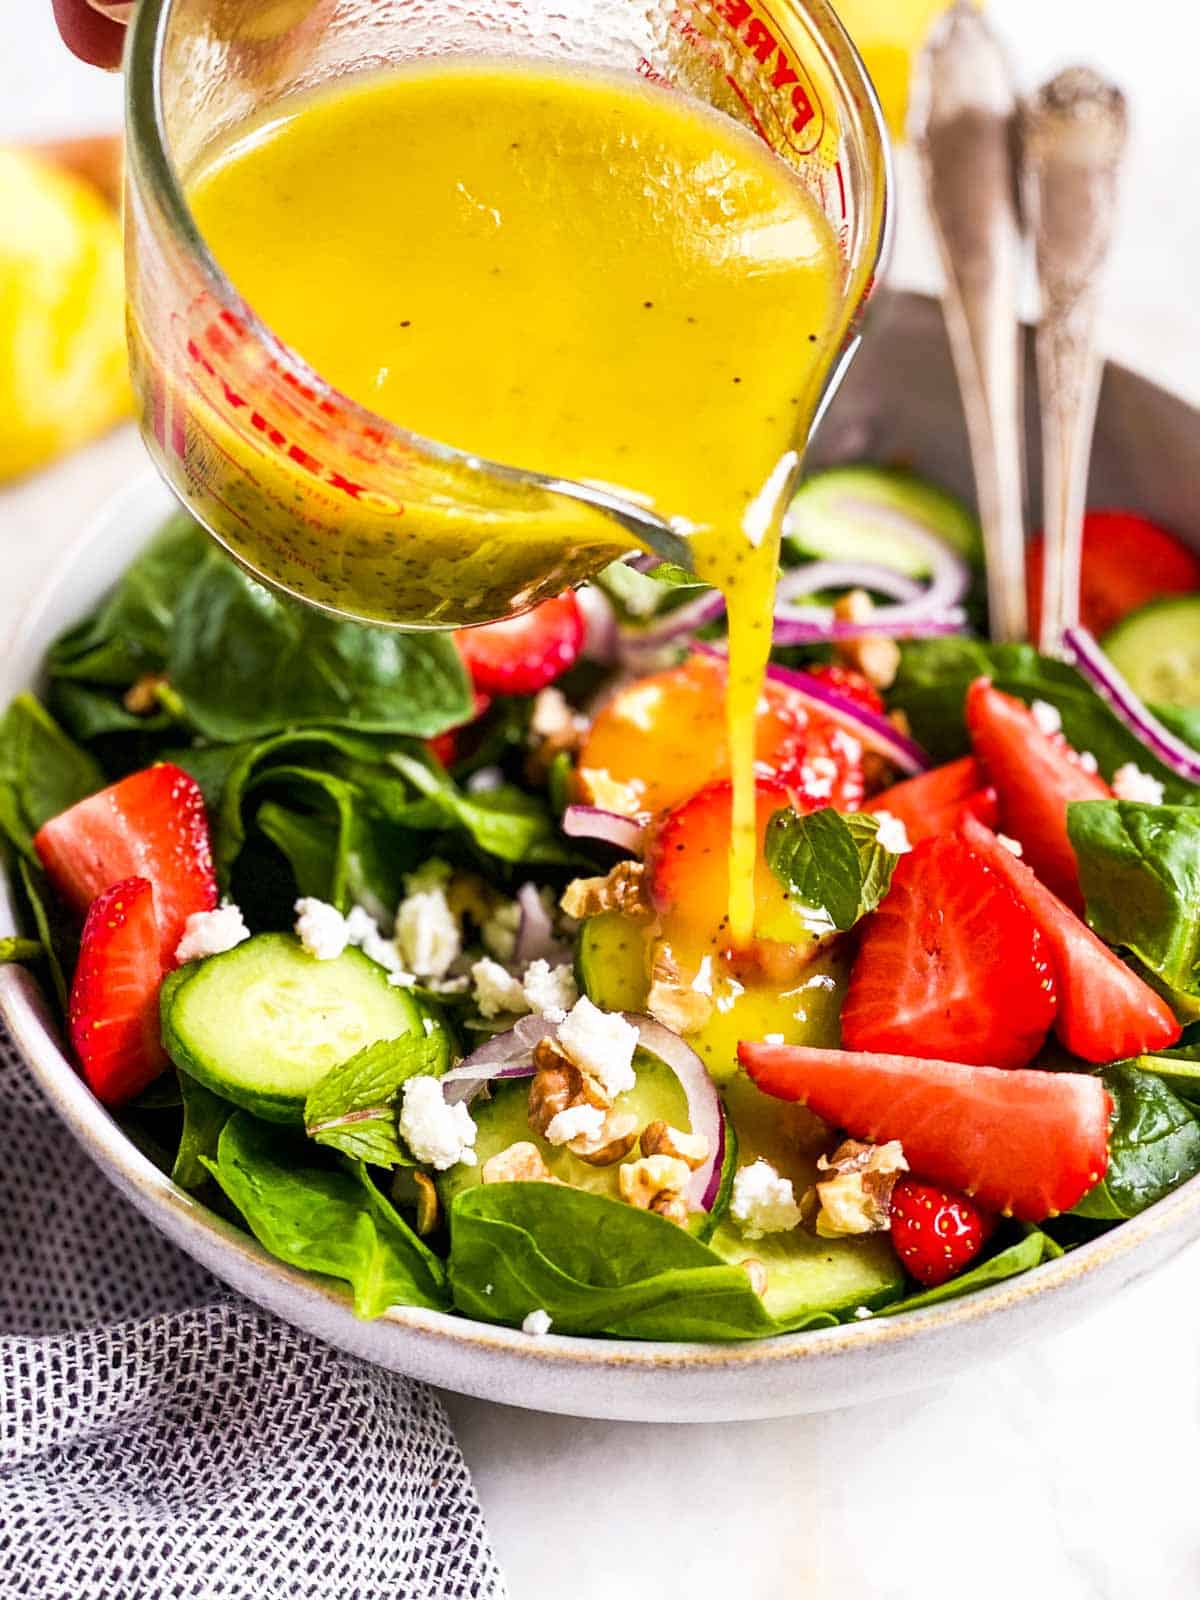 lemon poppy seed salad dressing pouring over spinach salad from glass measuring jug